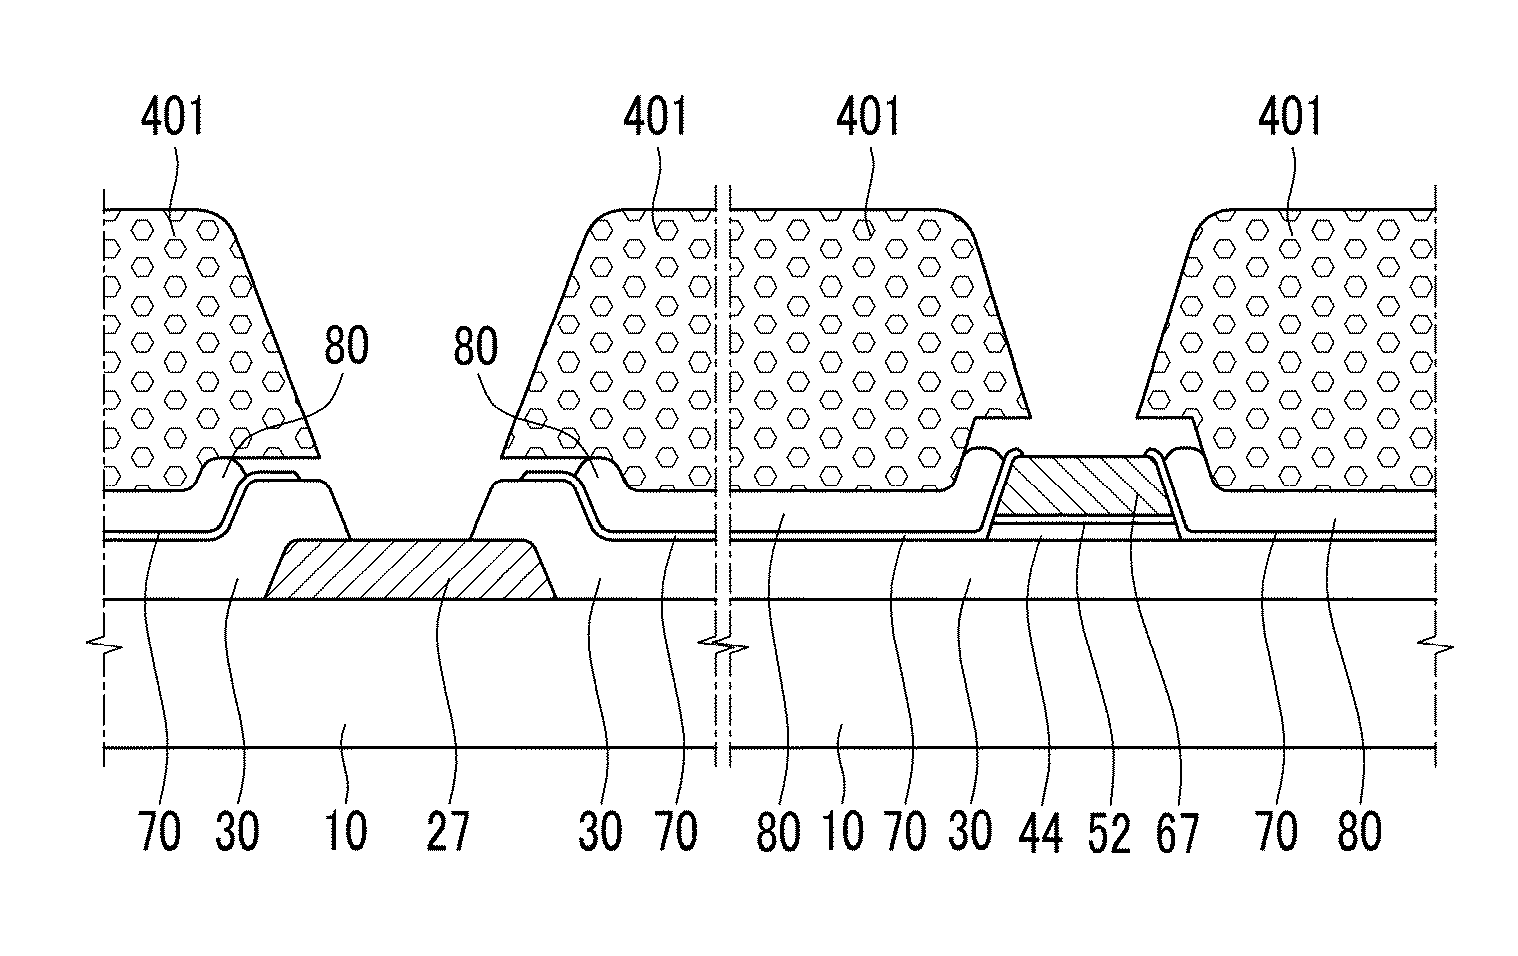 Thin film transistor substrate and manufacturing method thereof